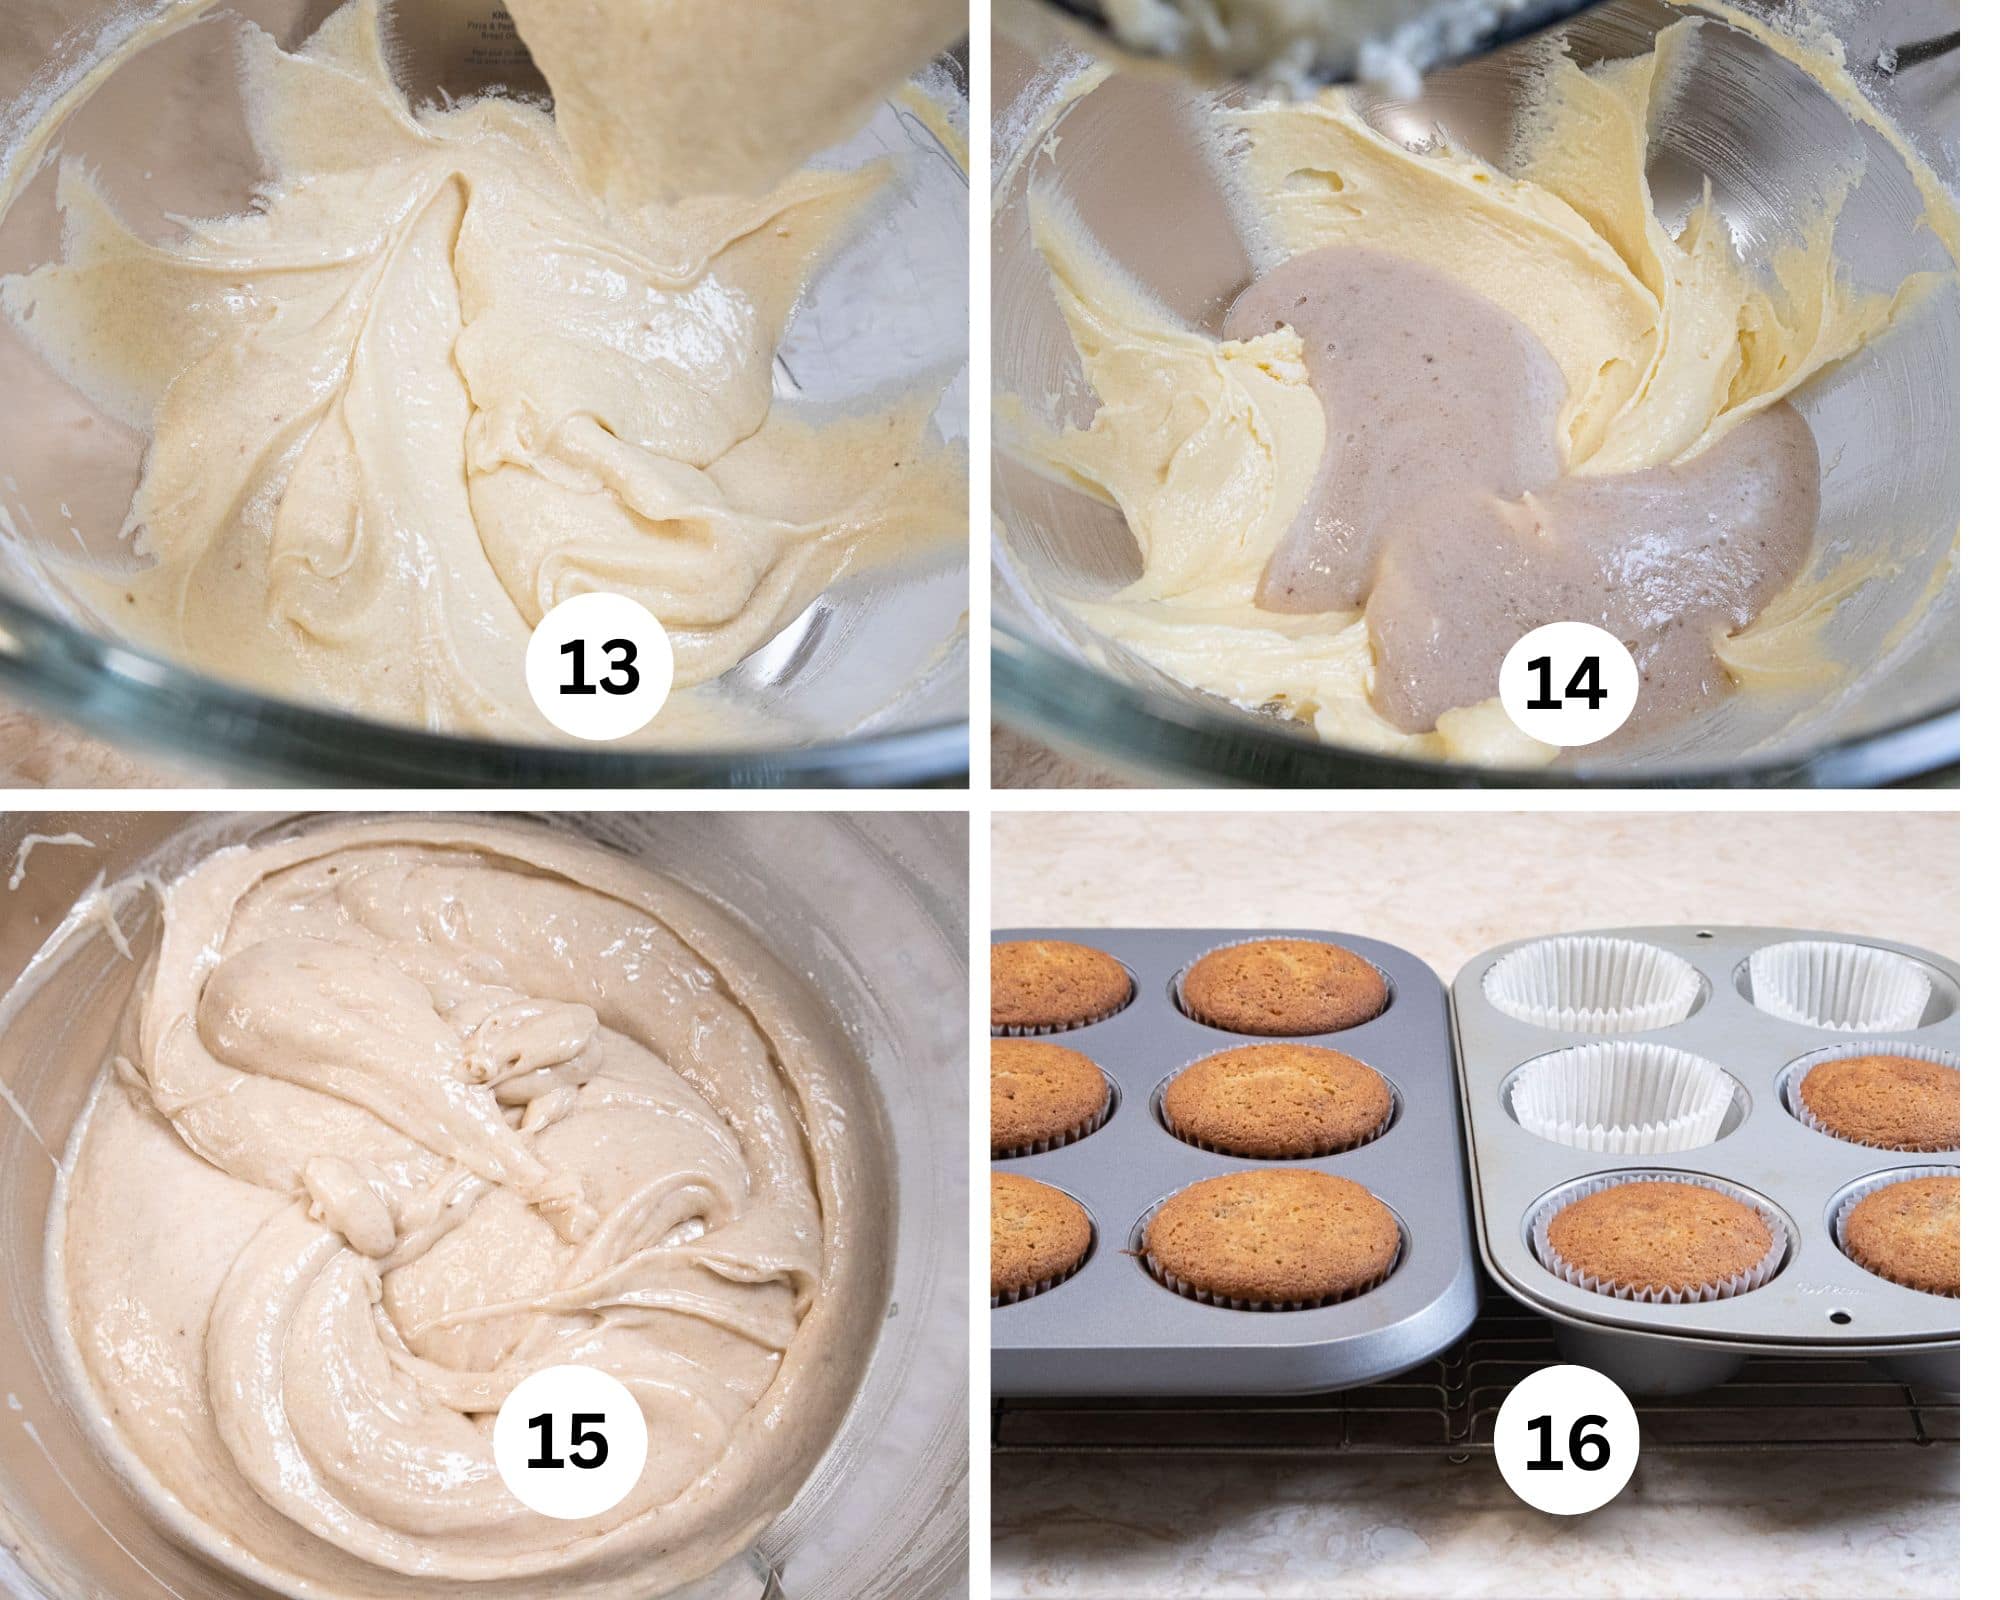 This collage shows the first addition of flour mixed in, followed by the addition of the first addition of banana mixture, the batter finished and the baked cupcakes.